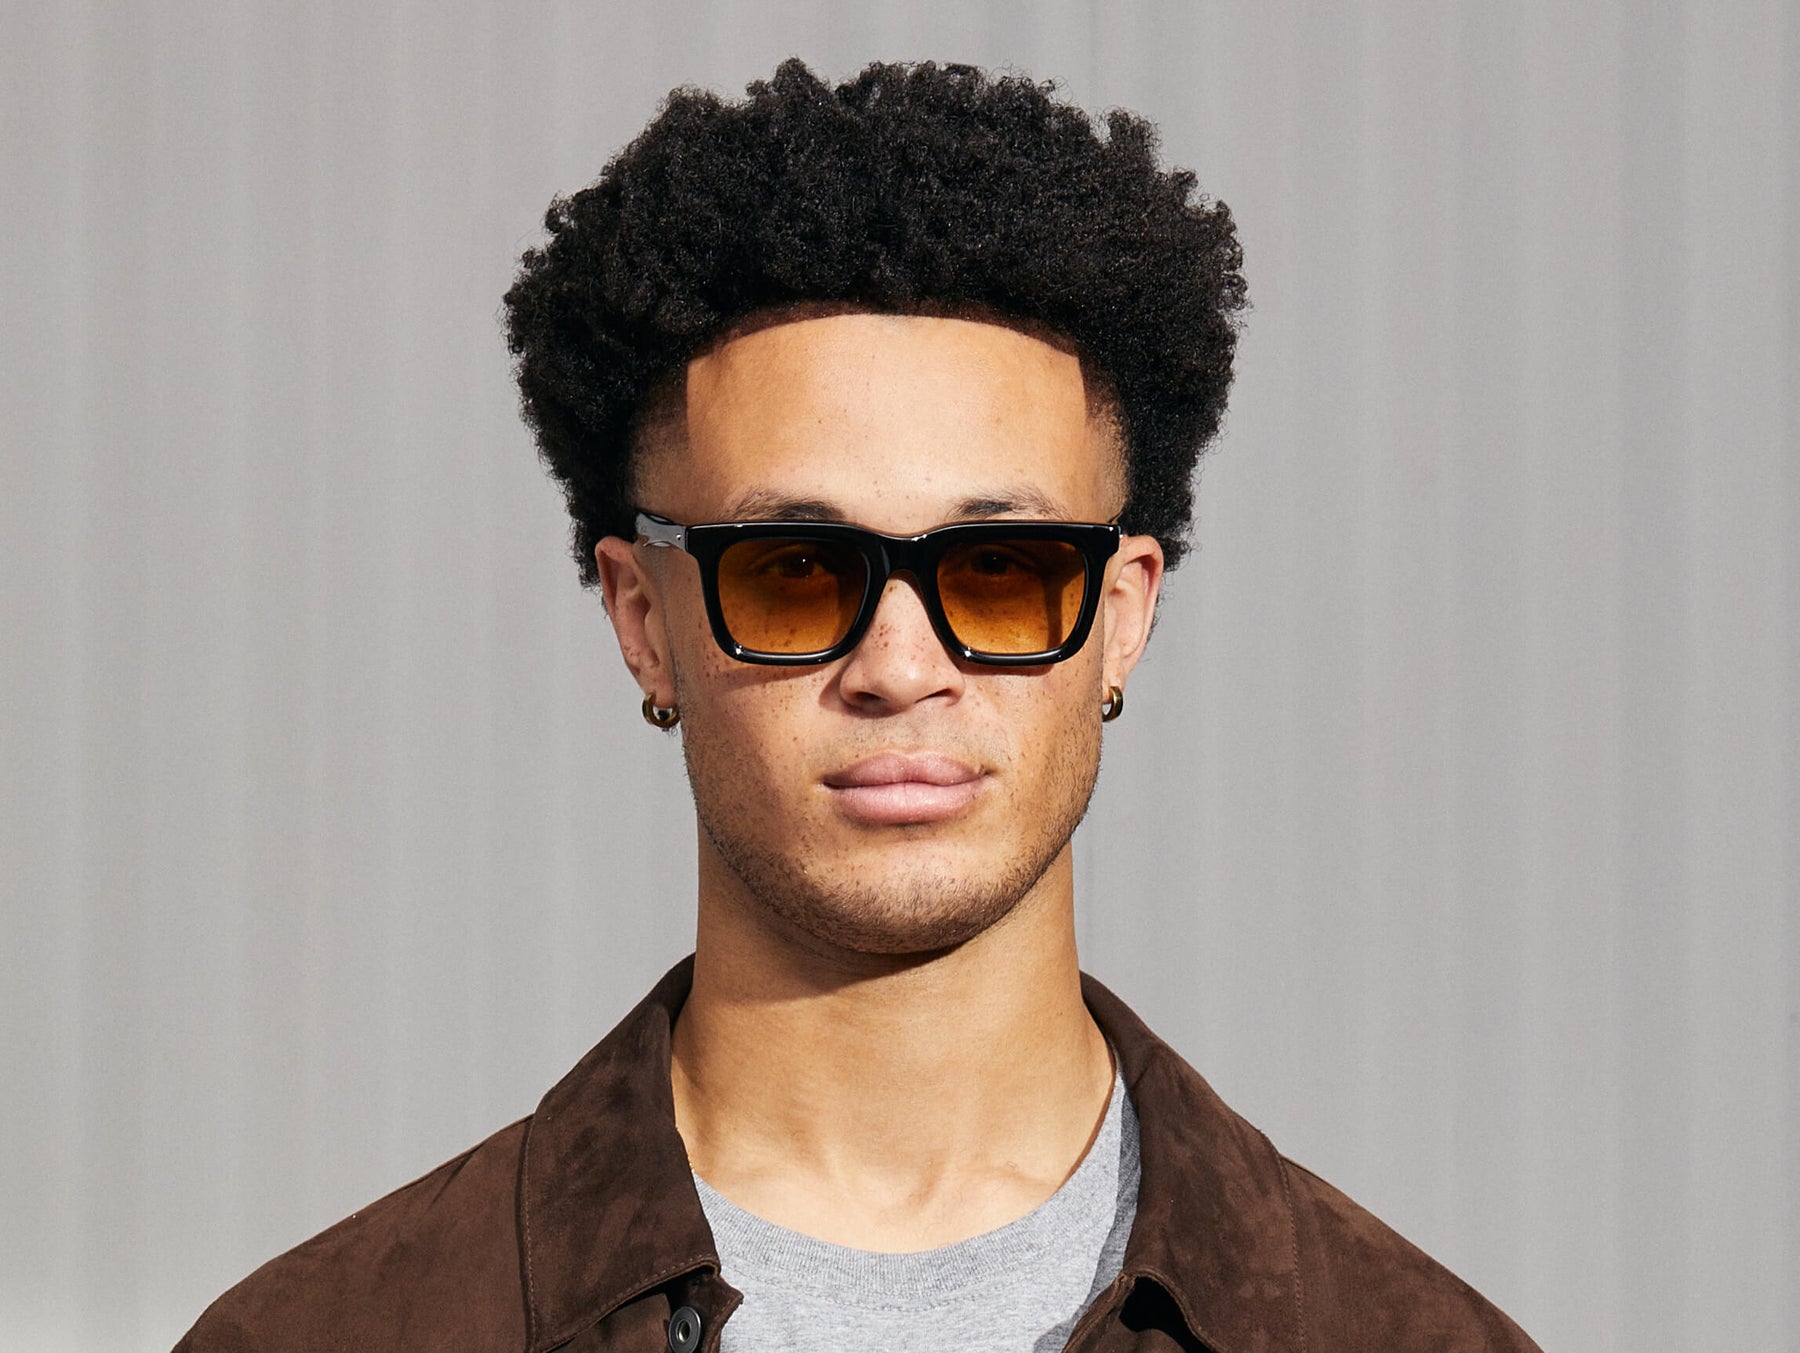 Model is wearing The RIZIK in Black in size 49 with Chestnut Fade Tinted Lenses